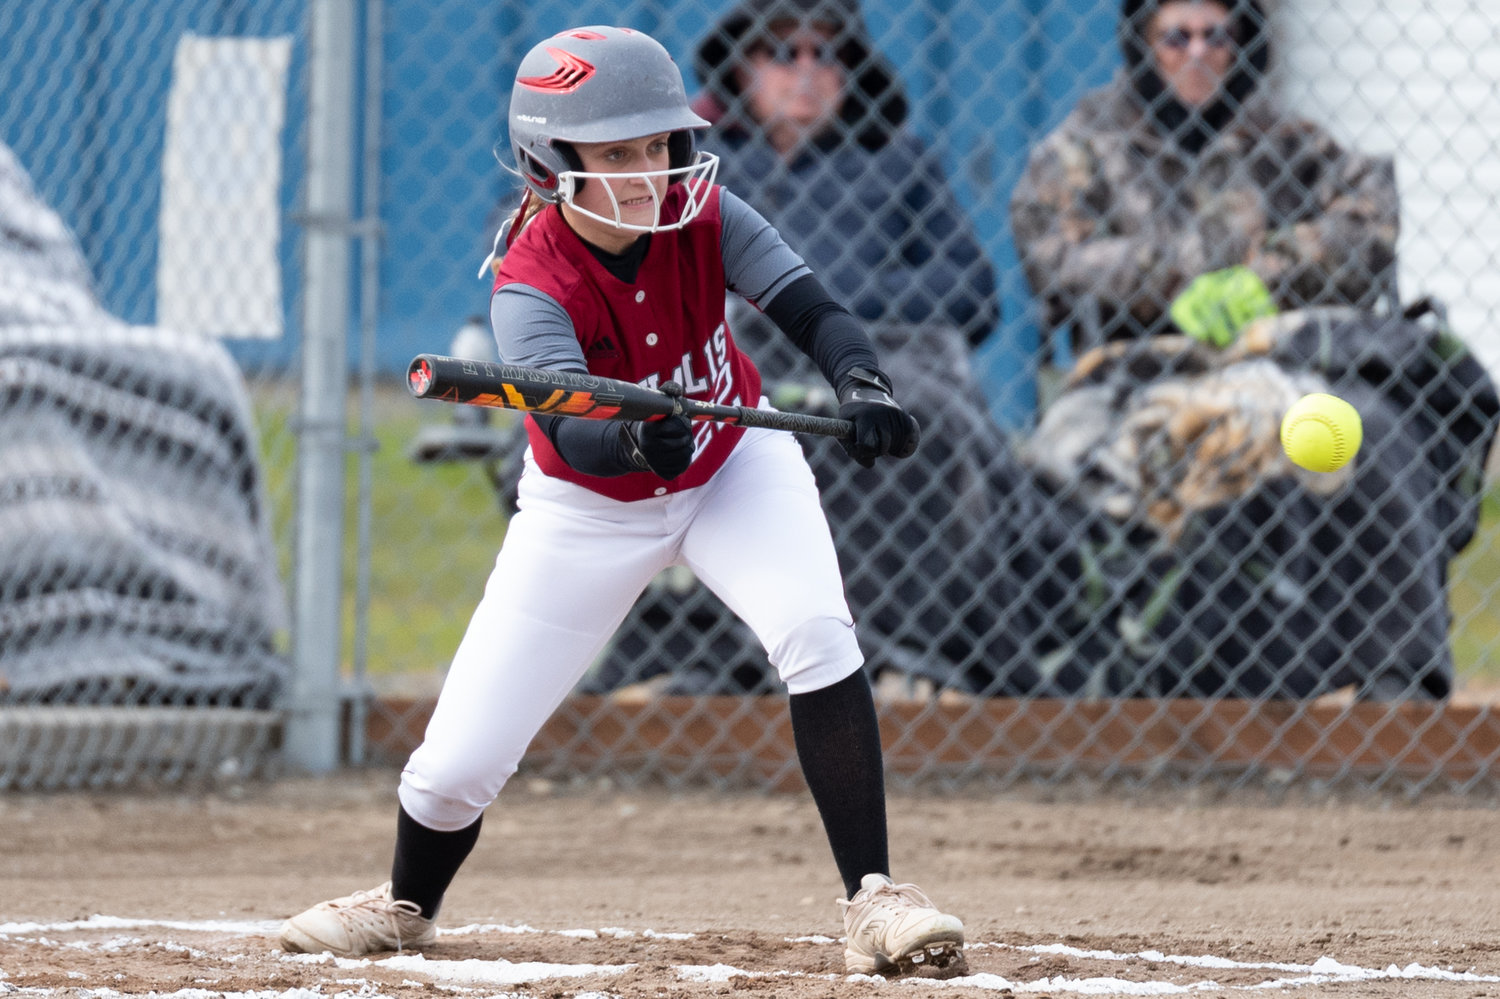 W.F. West infielder Avalon Myers looks to bunt against Rochester April 29.